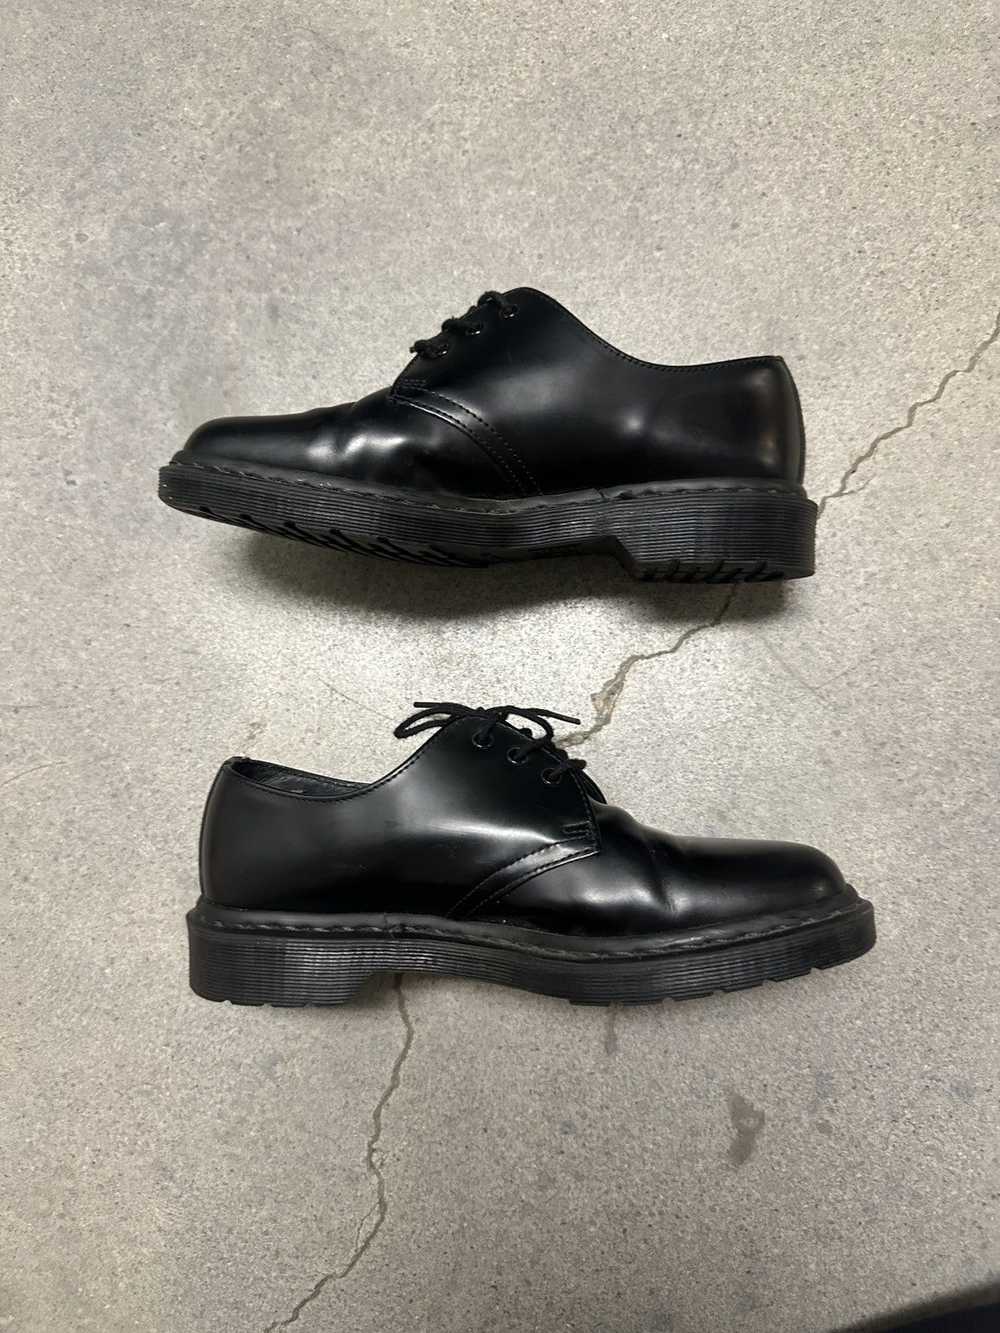 Dr. Martens 1461 Mono Smooth Leather Oxford Size 8 - image 3